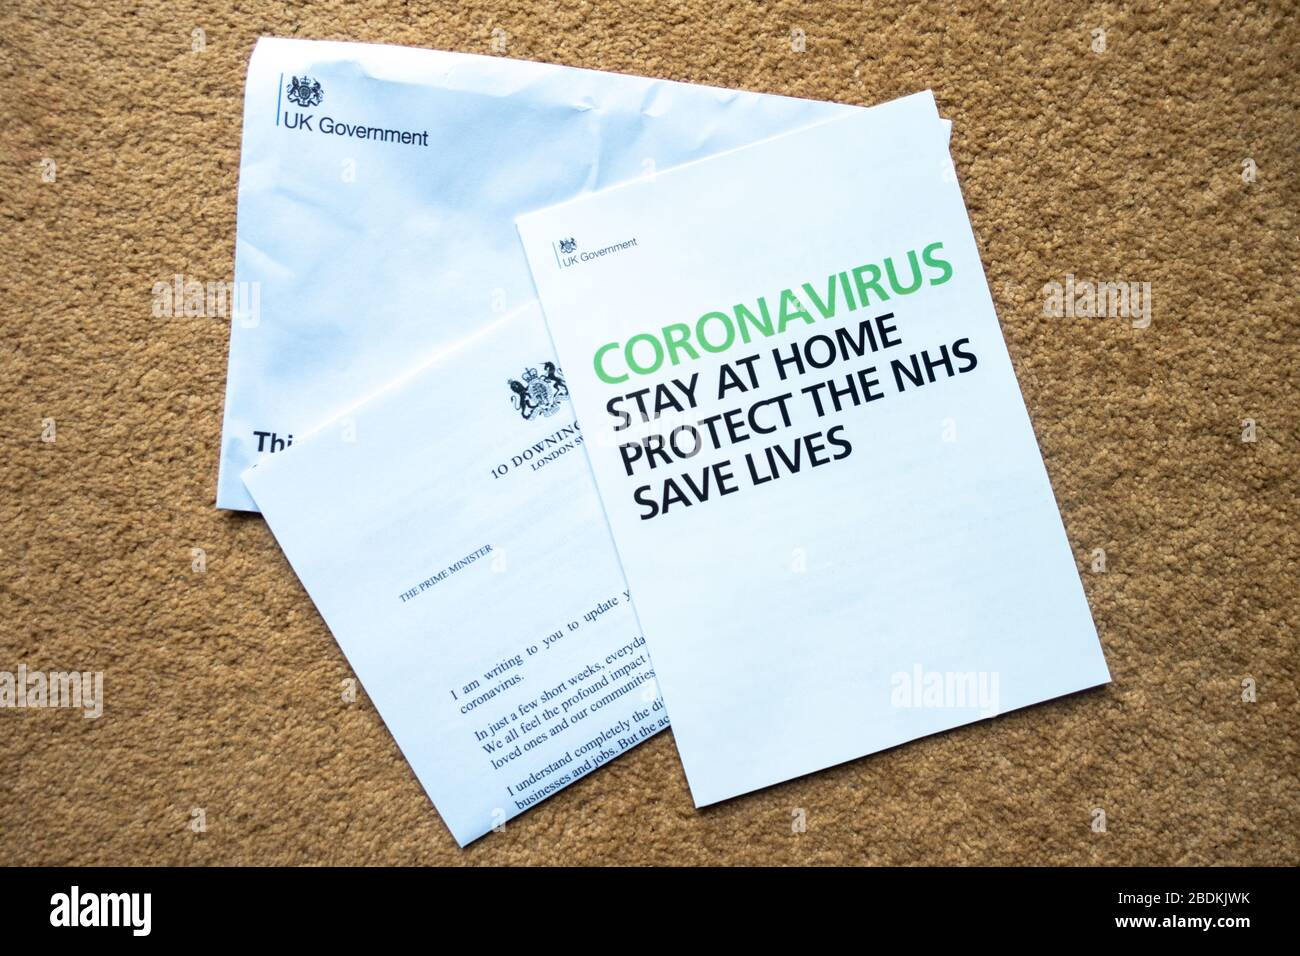 Letter and information pack sent by The UK Government to UK households in April 2020 giving instructions to follow and detailing advice on avoiding contracting the coronavirus. Stock Photo